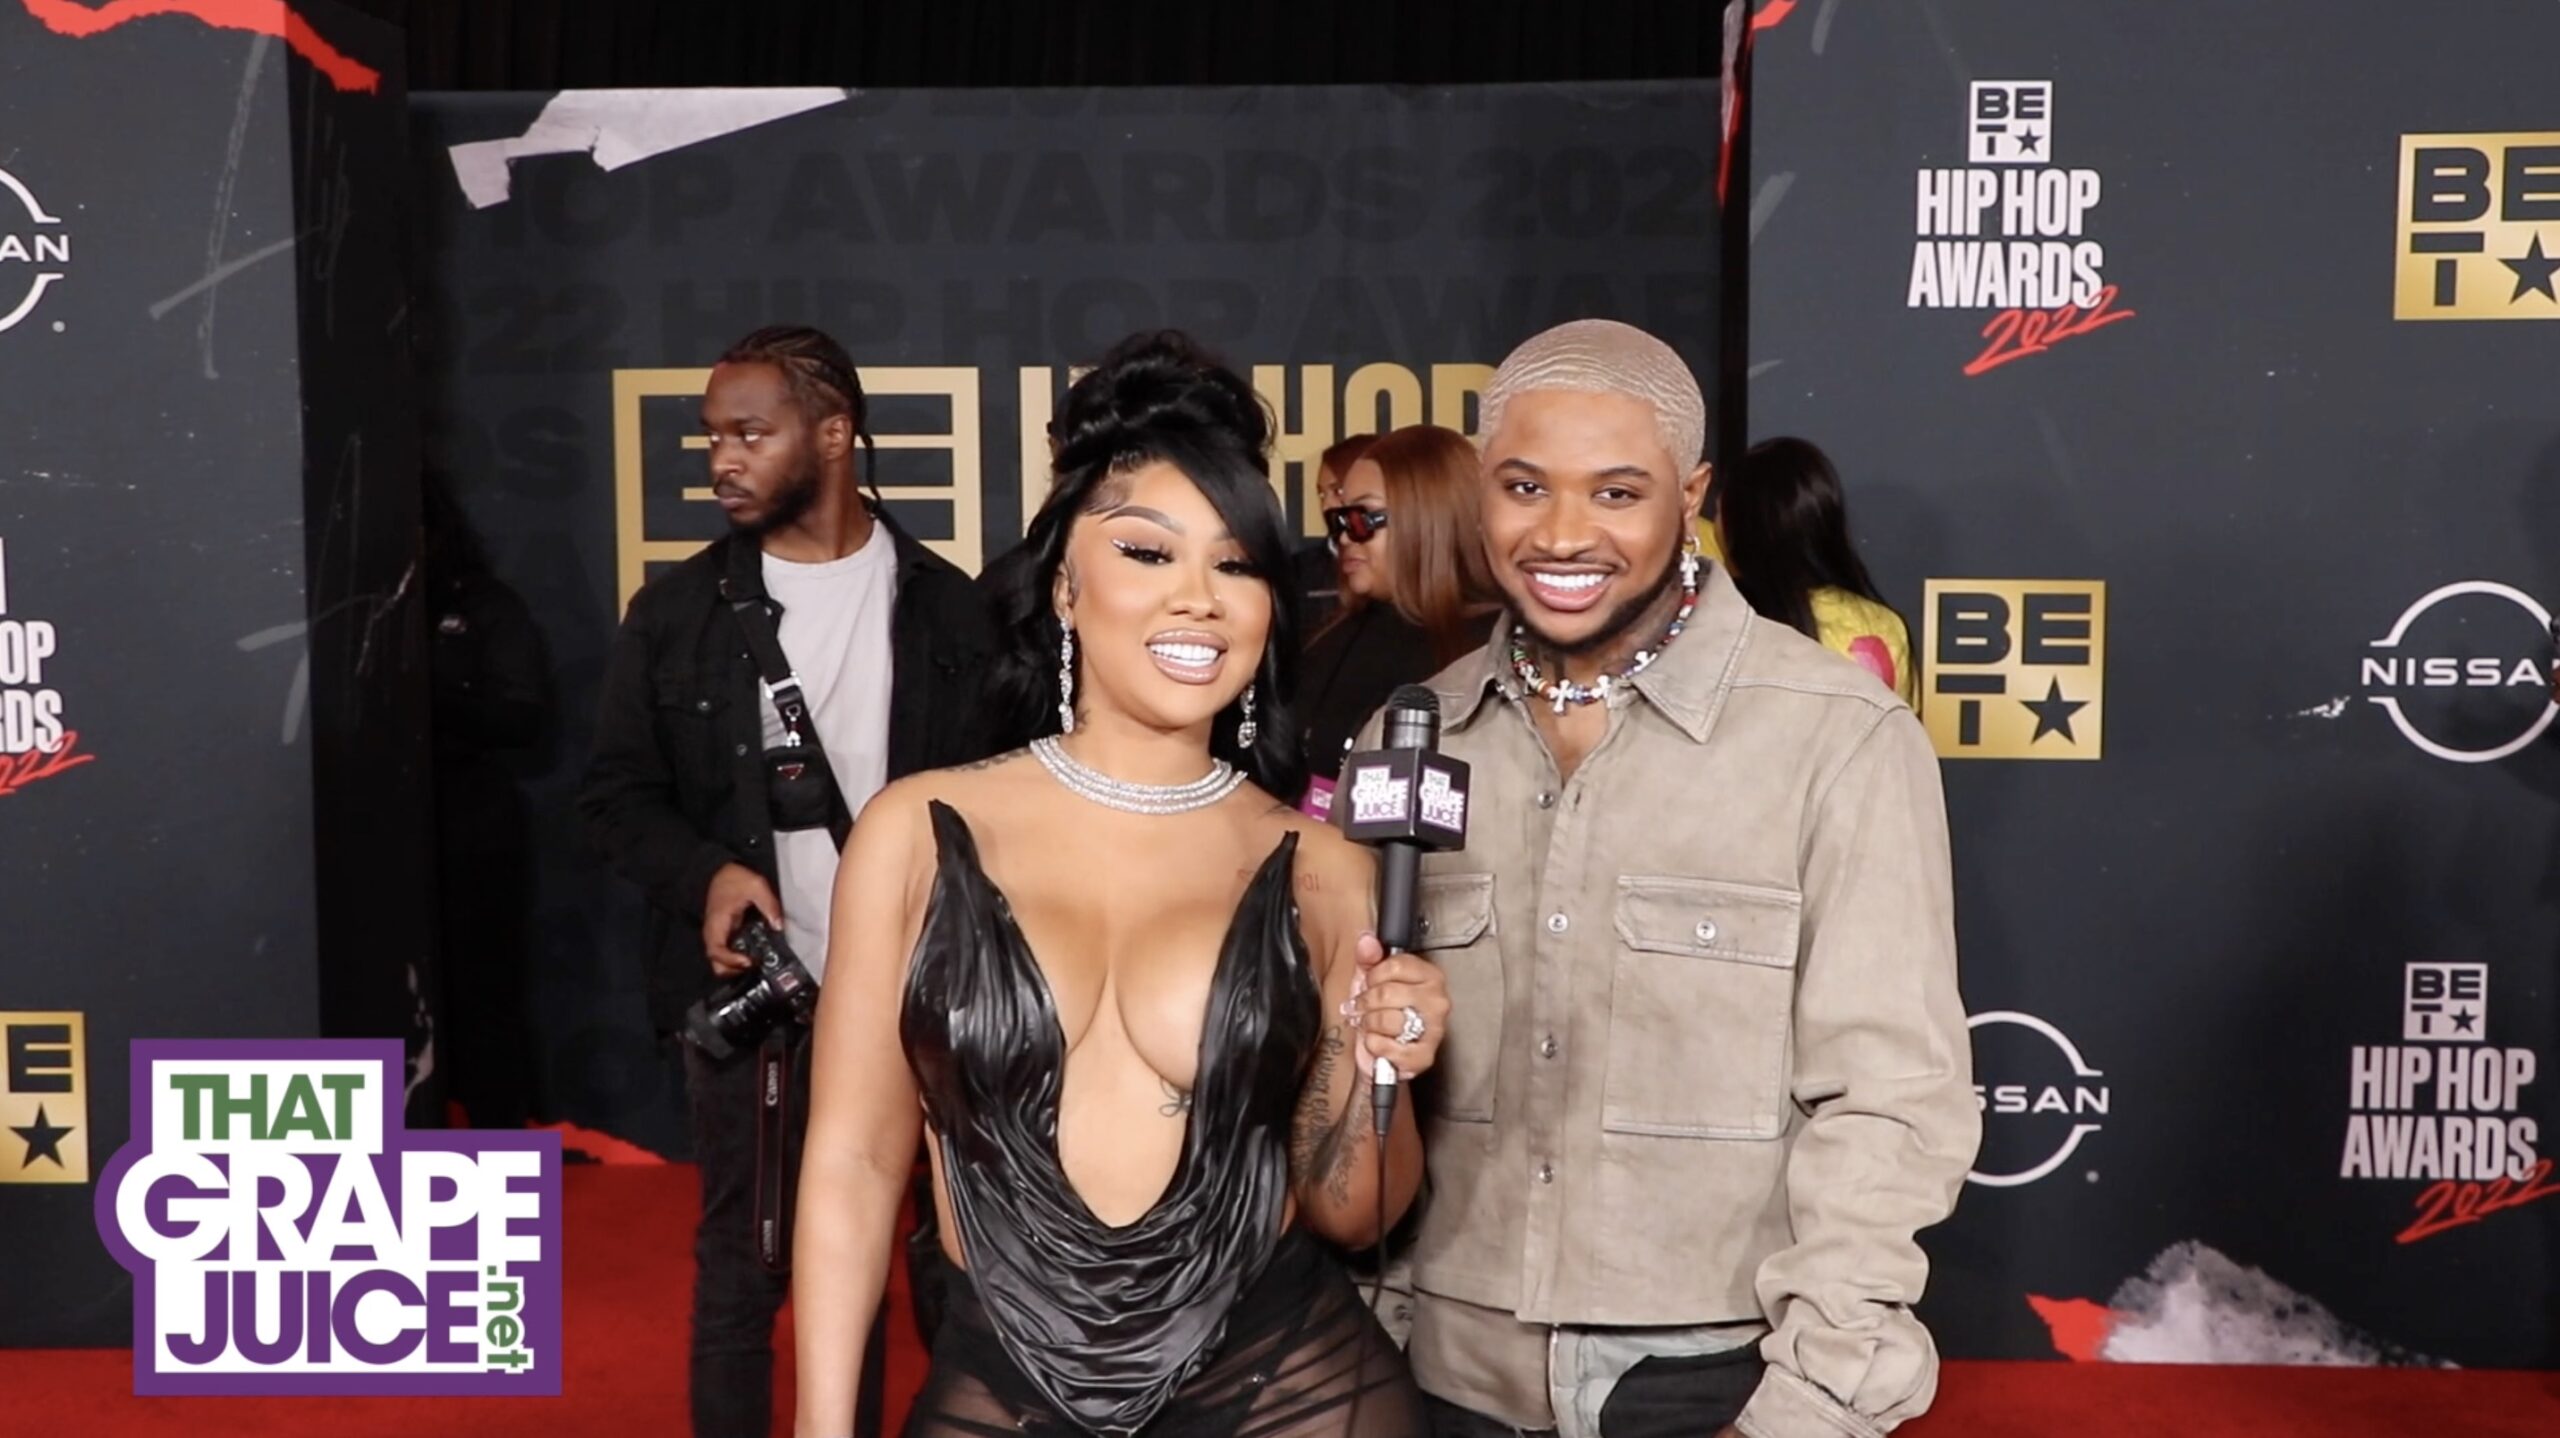 Exclusive: Ari Fletcher Dishes on New Show with Arrogant Tae at BET Hip Hop  Awards 2022 - That Grape Juice